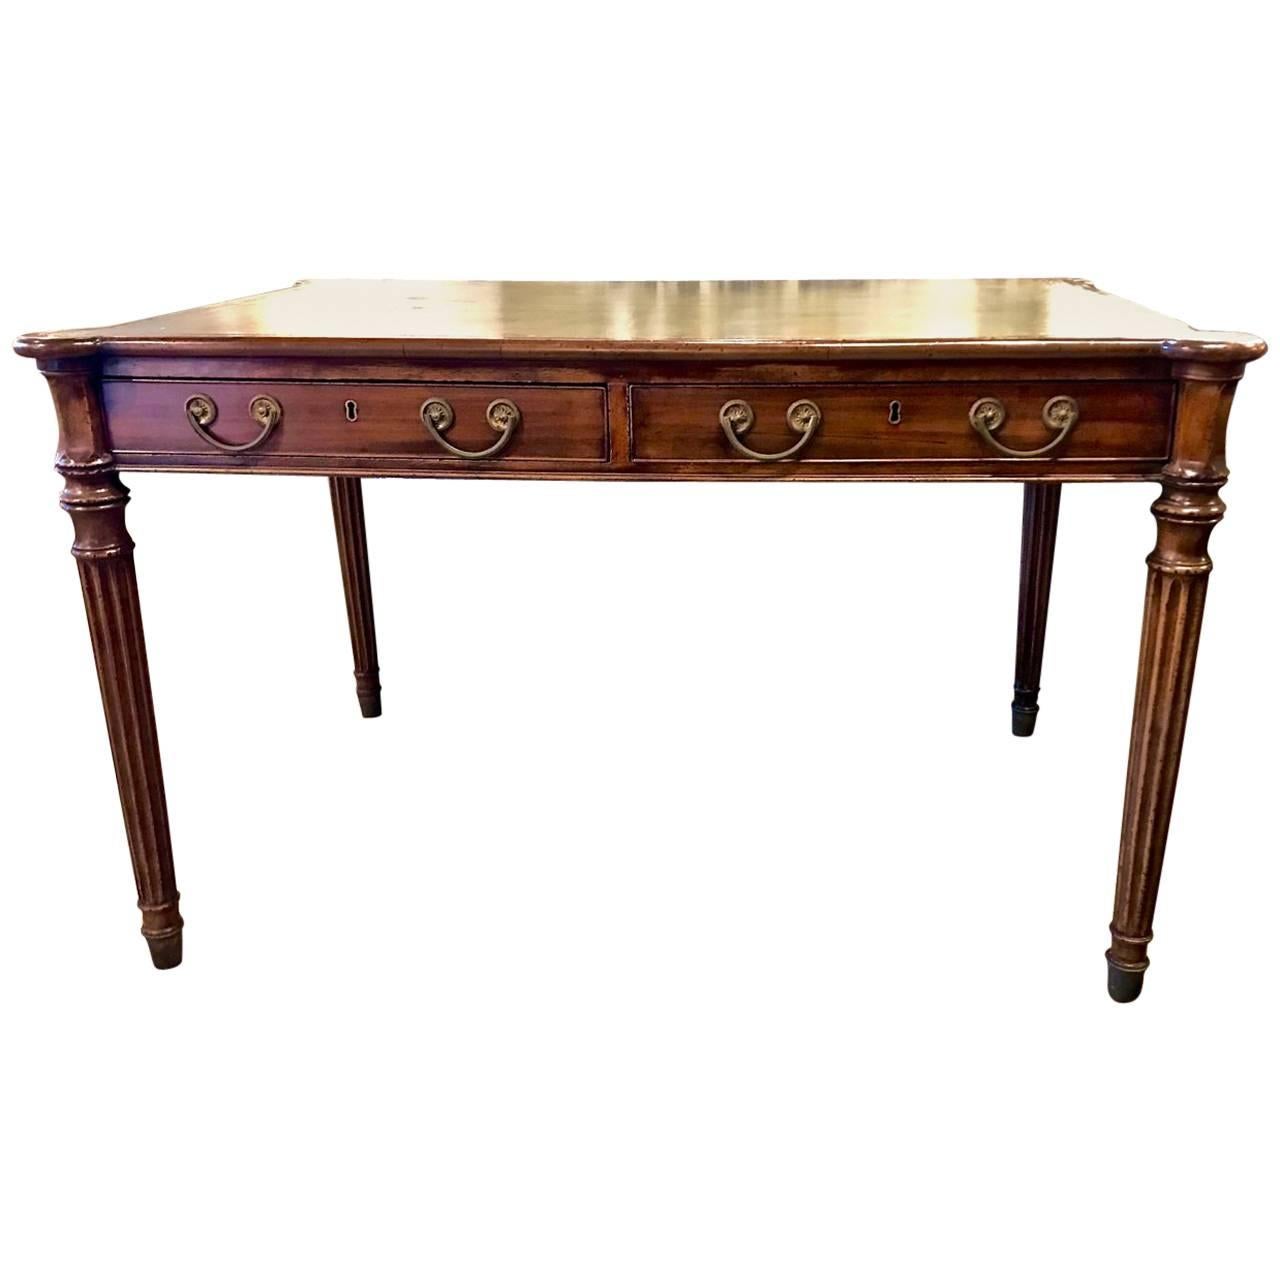 This is a very high quality English Mahogany Partners Writing Table. The table dates to circa 1810-20 and is detailed with functional drawers to both sides of table, outset hexagonal corners, solid mahogany and oak construction, magnificent all